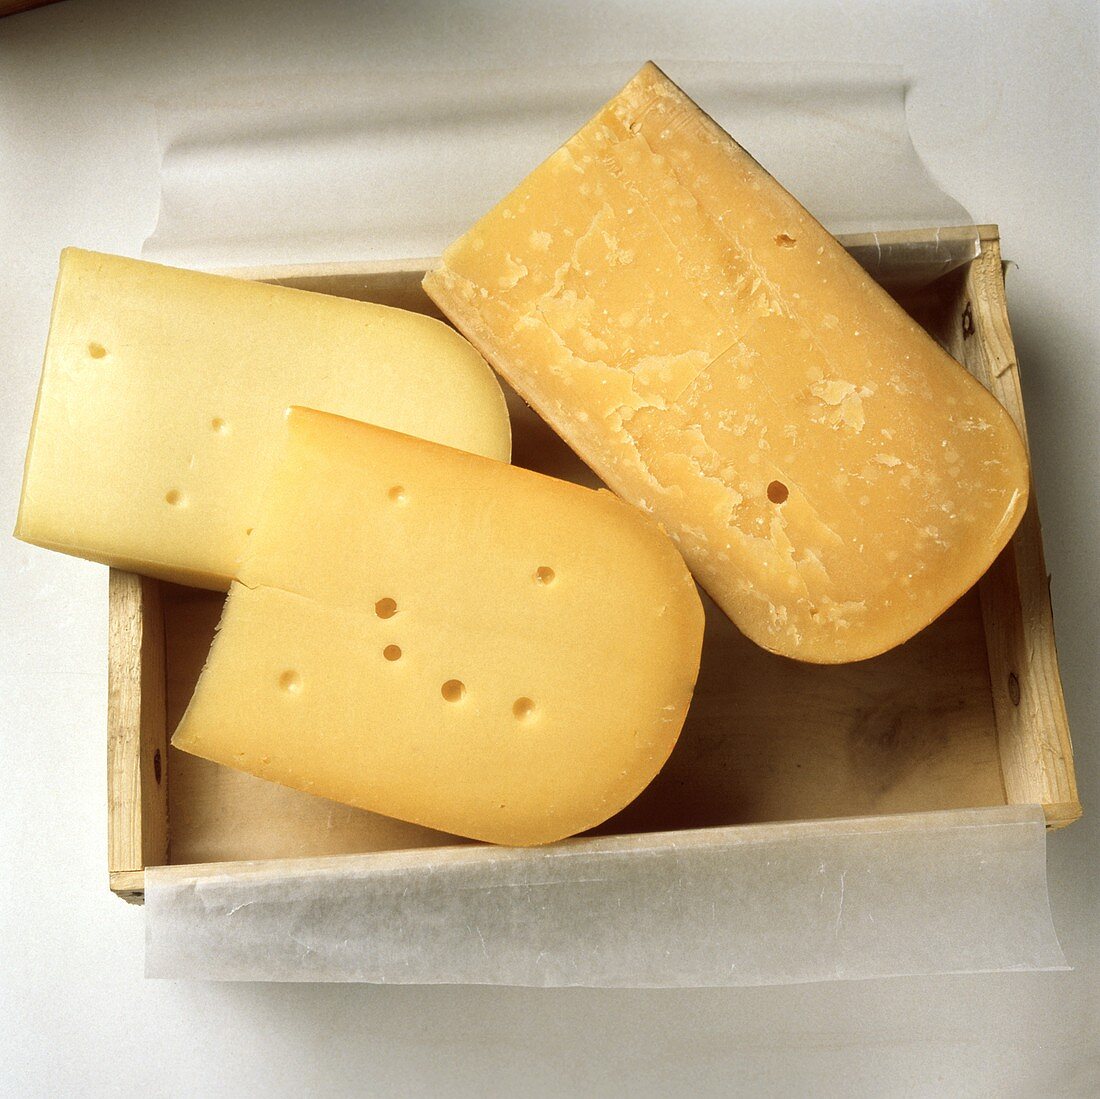 Three Assorted Wedges of Gouda Cheese in a Box